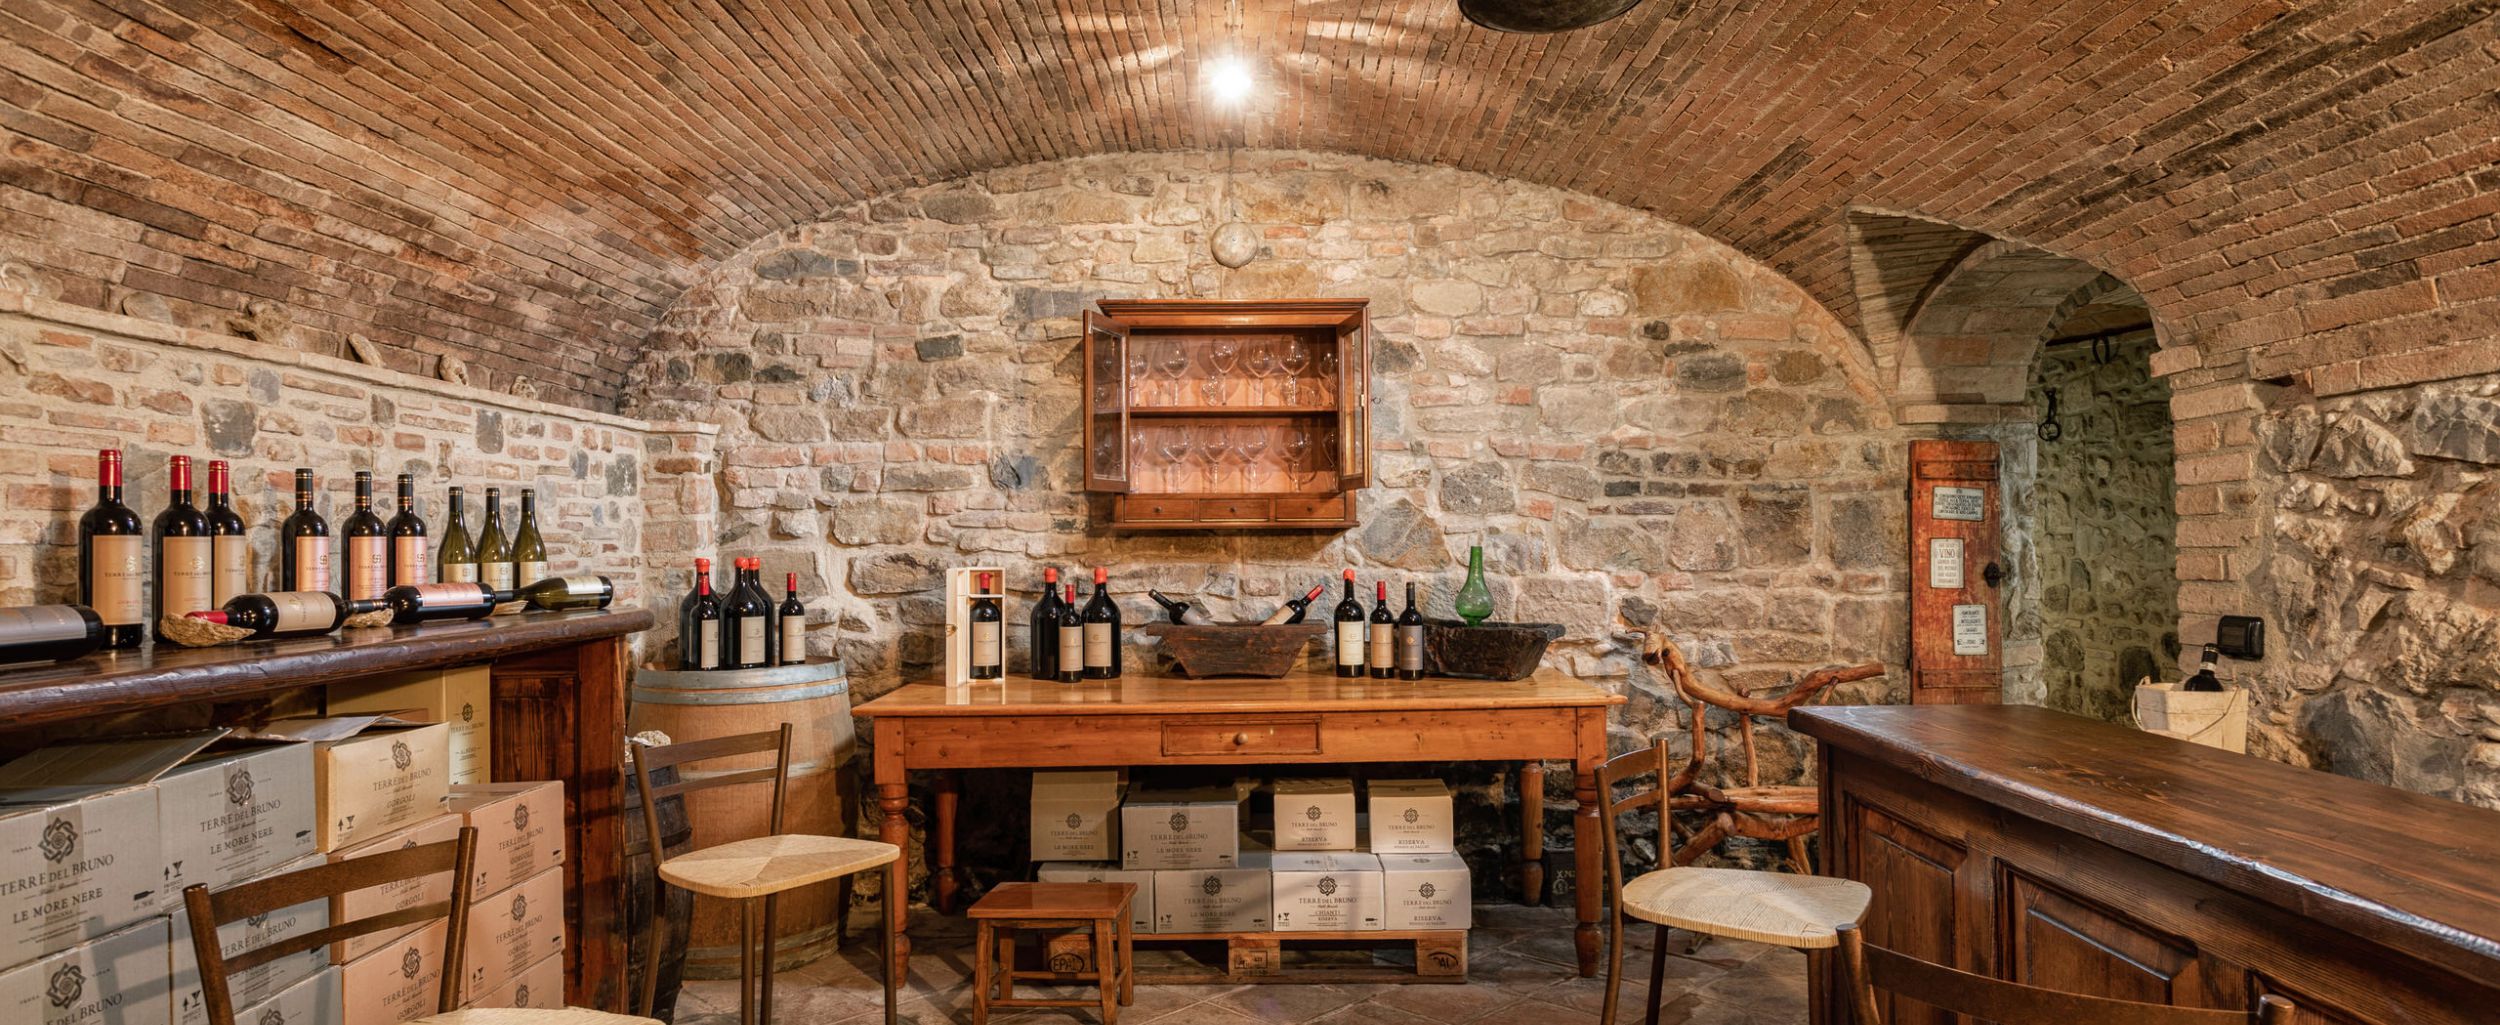 Terre del Bruno Tours and tastings